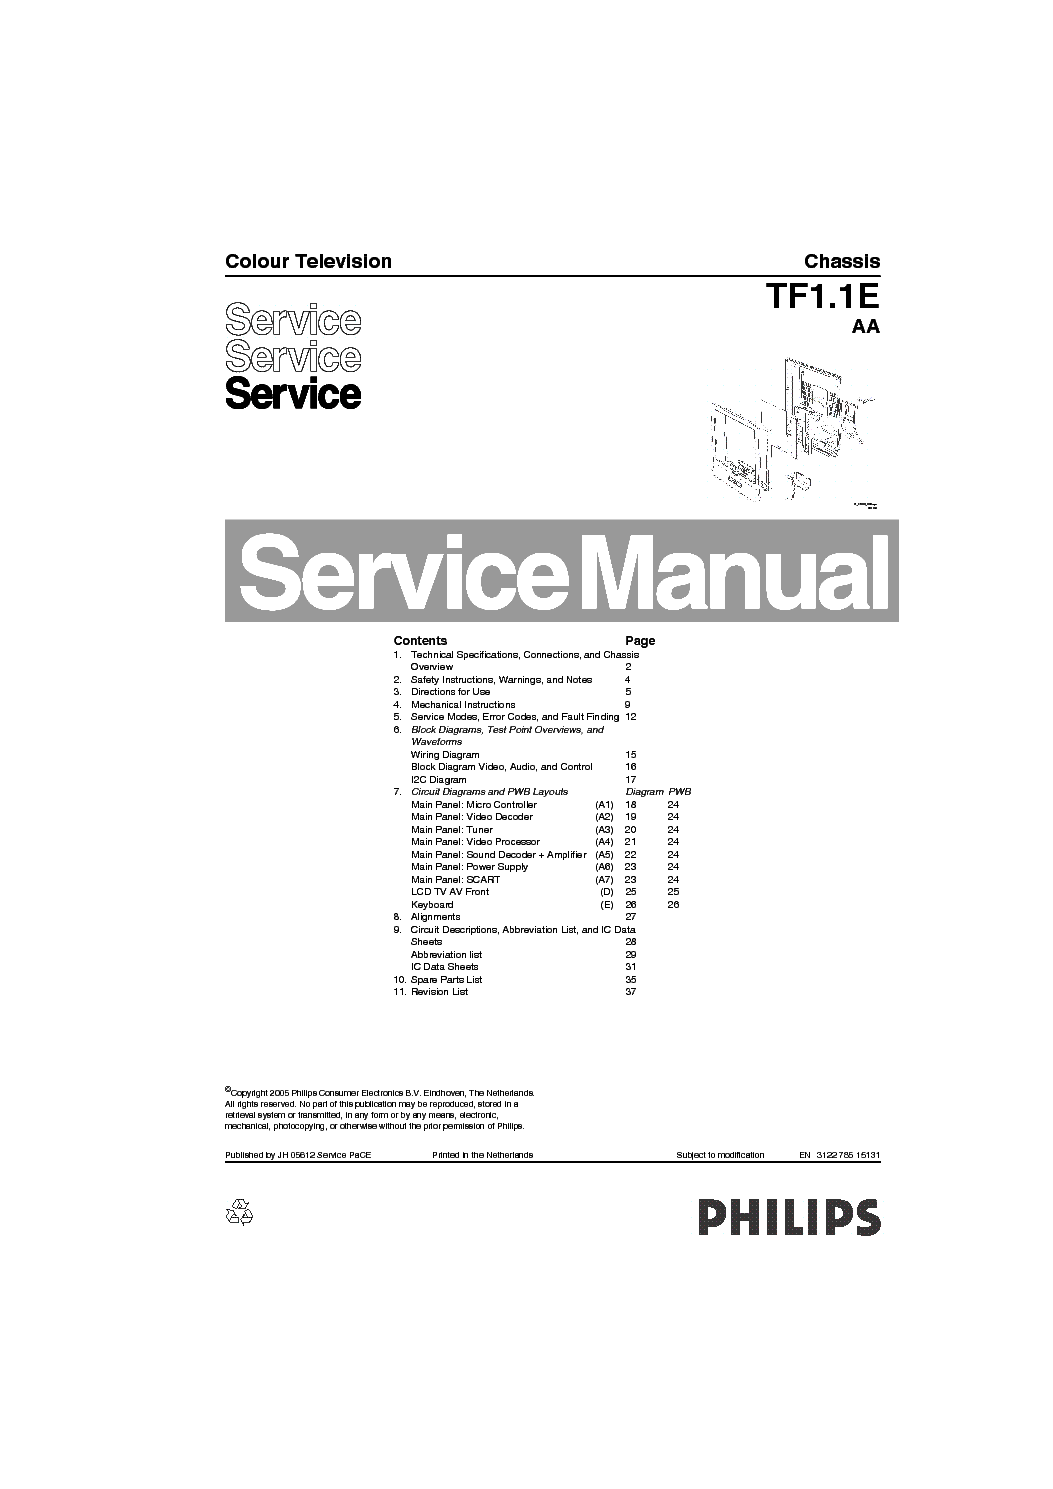 PHILIPS TF1.1EAA CHASSIS LCDTV service manual (1st page)